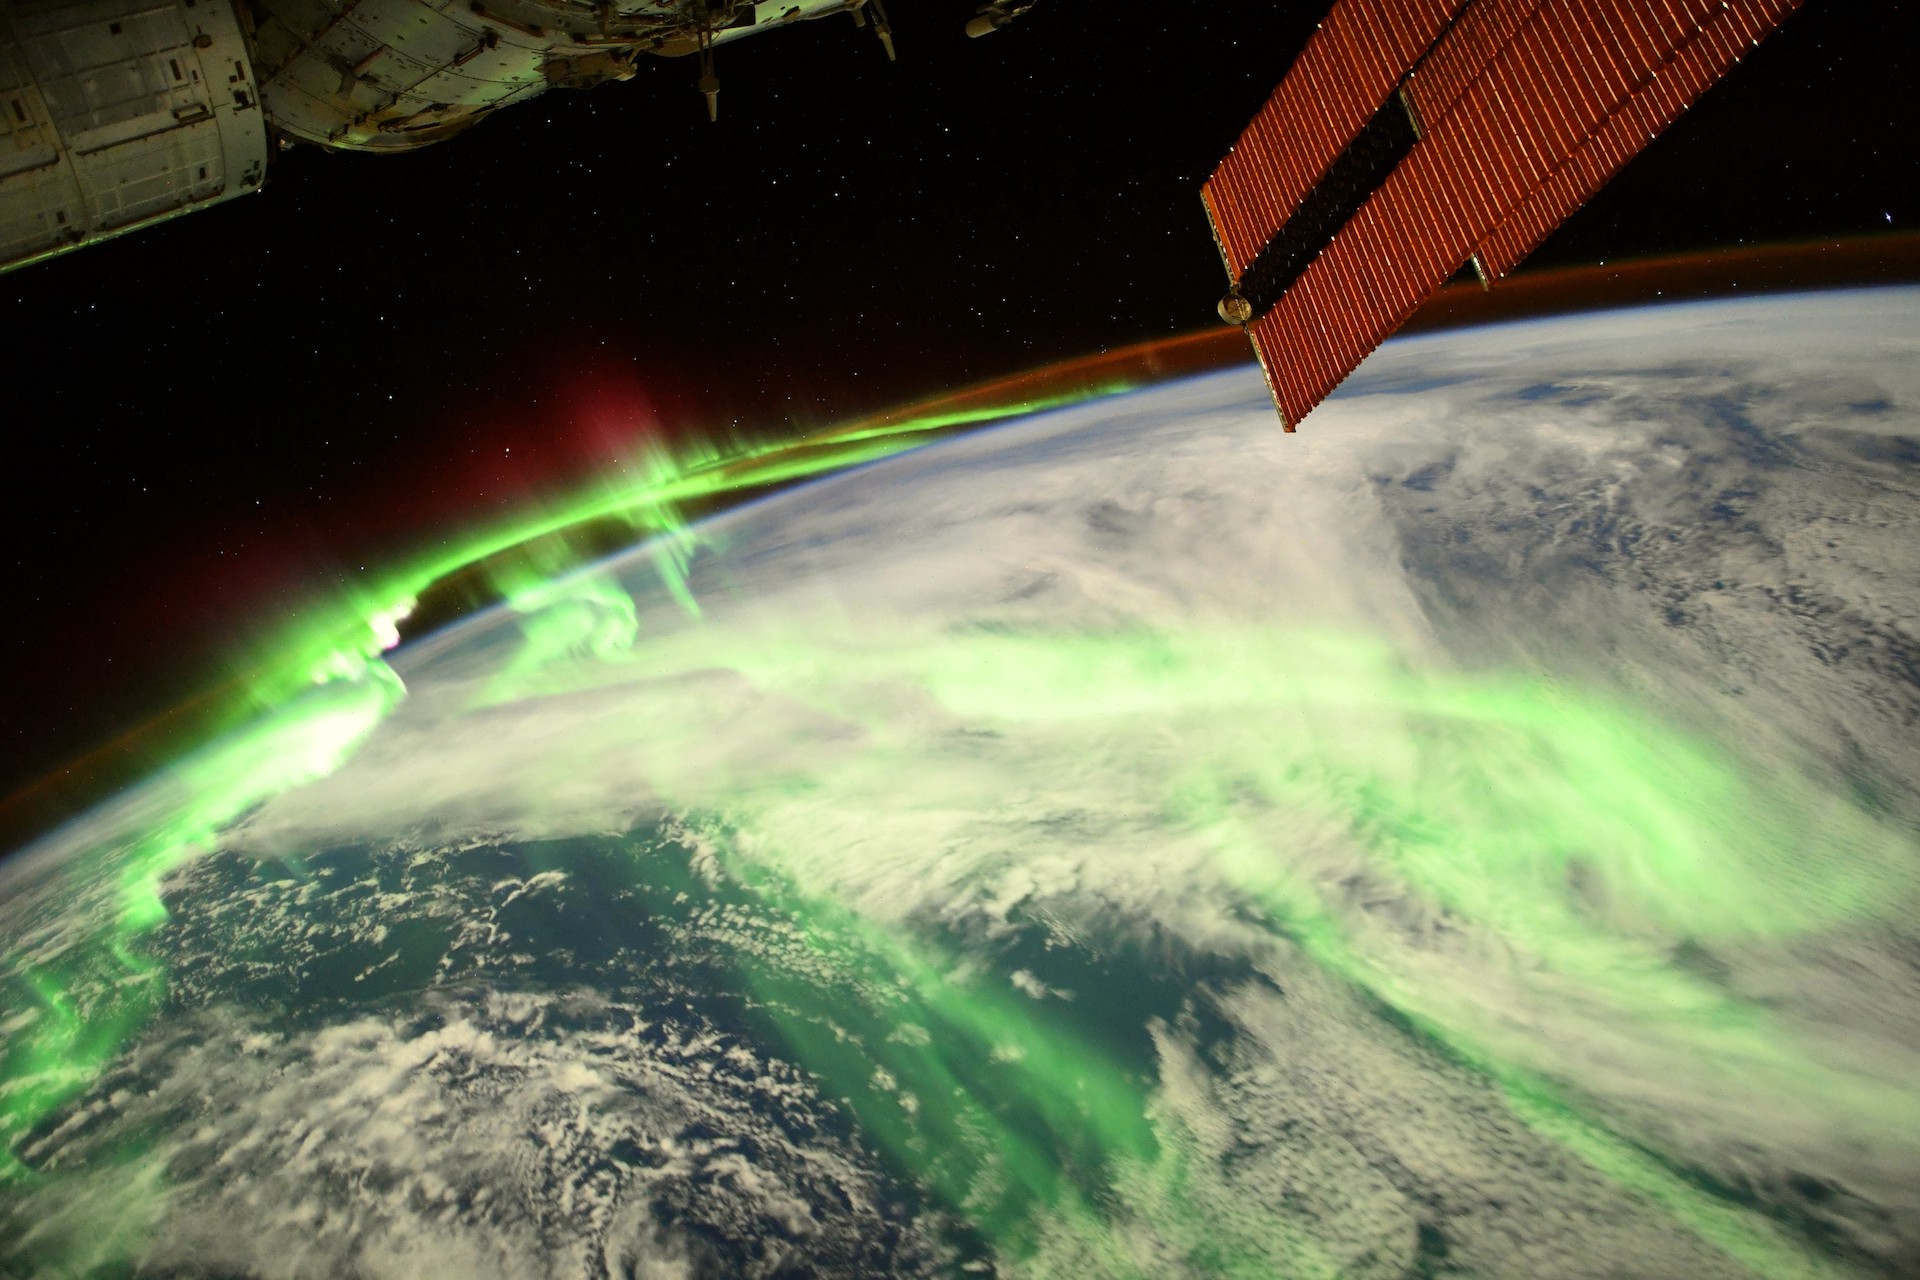 Superbright aurora lights up Earth’s night side in incredible image from space thumbnail